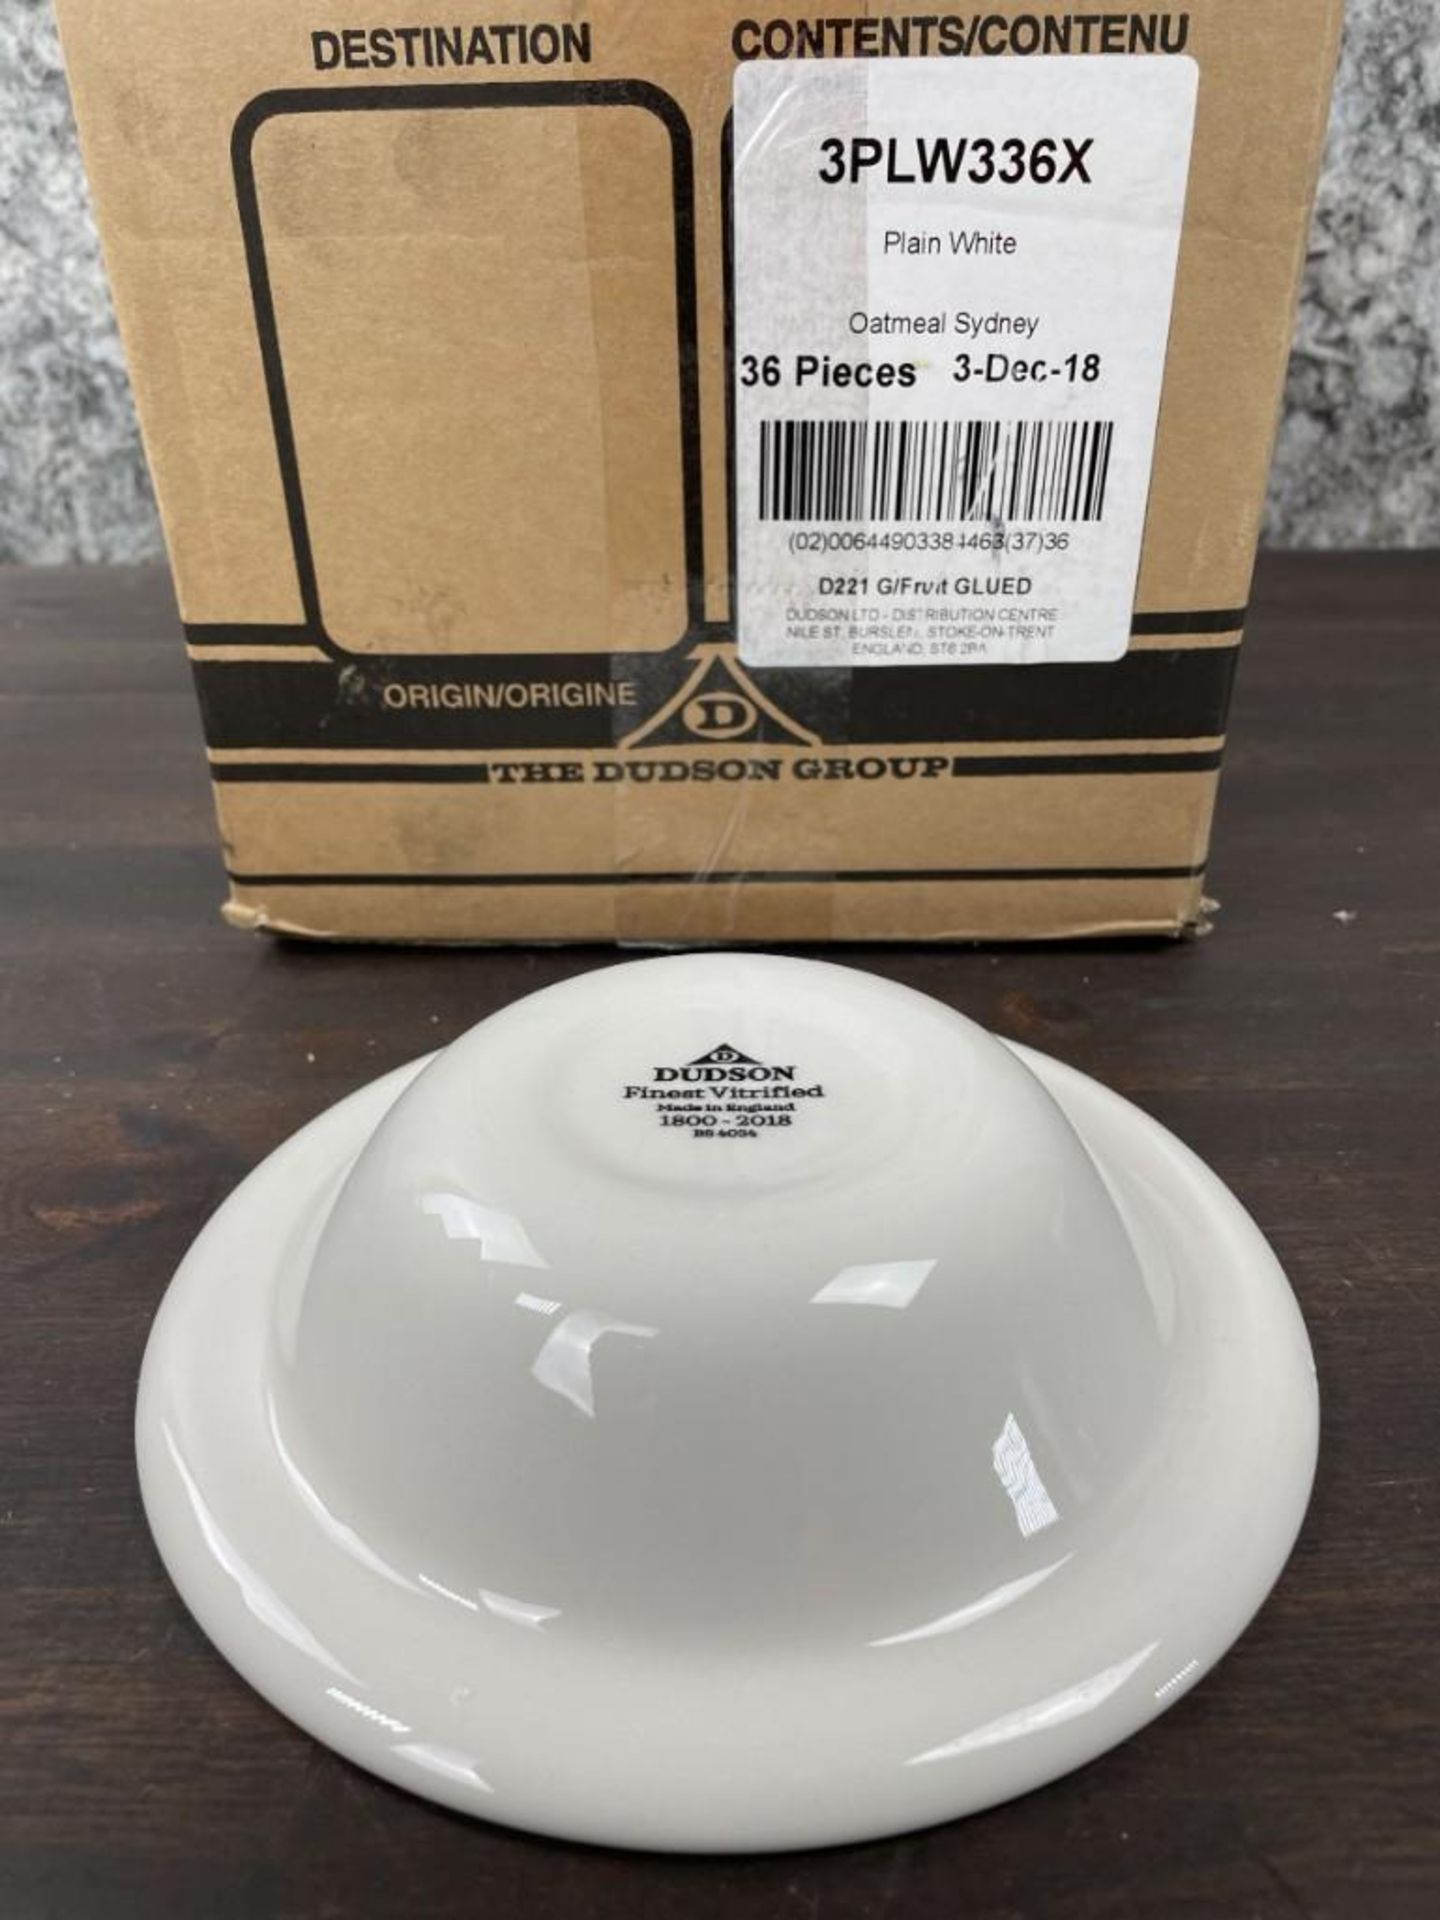 DUDSON CLASSIC 6-3/8" OATMEAL BOWLS - LOT OF 72 (2 CASES) - Image 2 of 5